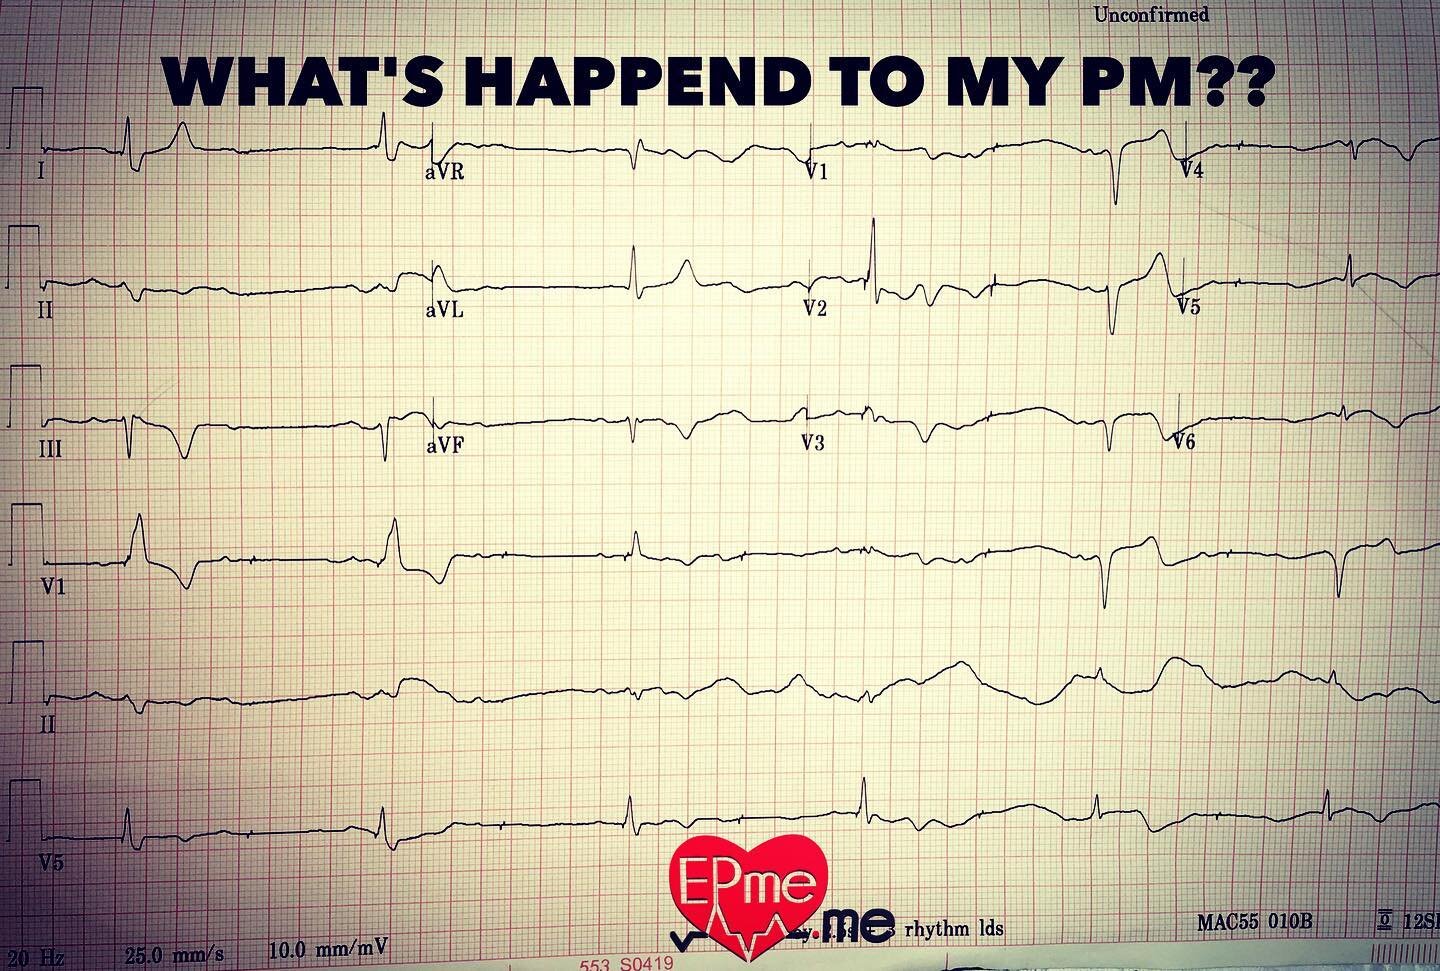 Patient 2 weeks post implantation from a small center opened to found electrodes not fixed.
 #pacing #cardiology #cardiologynurse
#electrophysiology #ekg #ecg #heart
#heartrhythm #eps #ep #health
#medstudent #med #medic #medicine
#medical #catheteriz